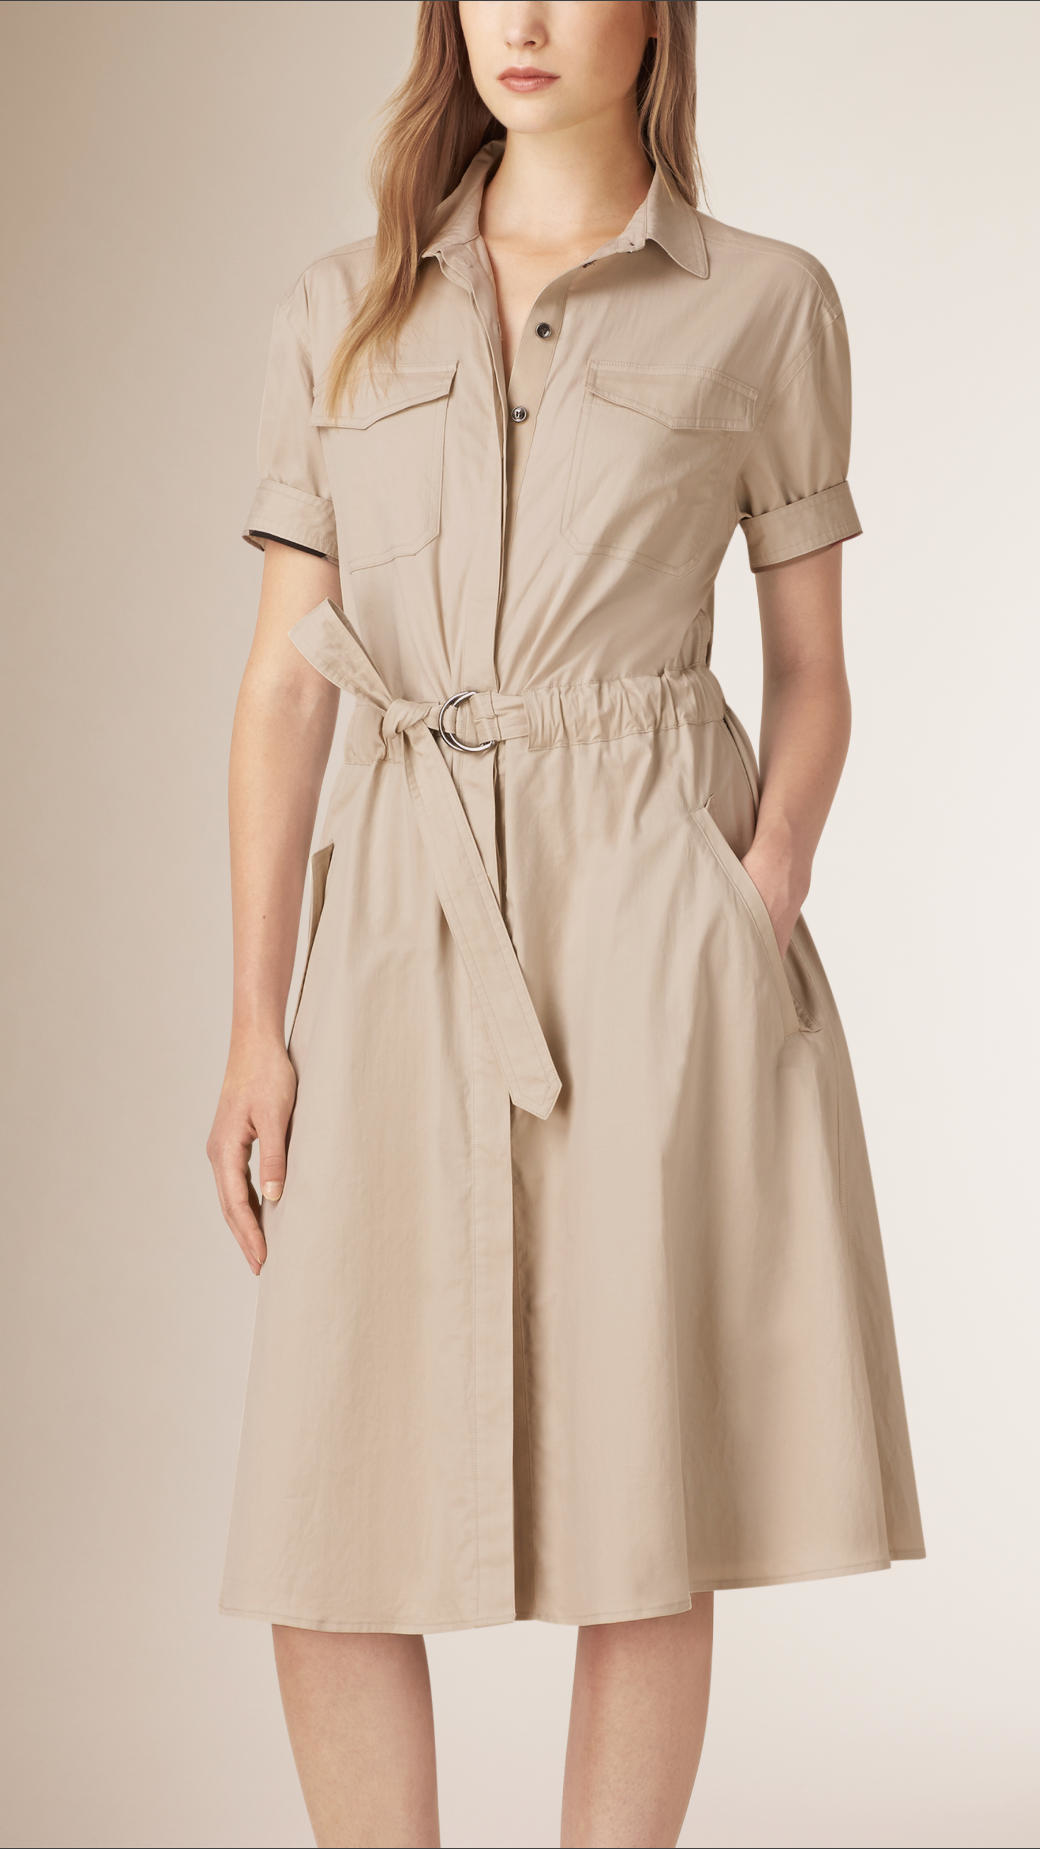 Lyst Burberry  Cotton Military Shirt  Dress  in Gray